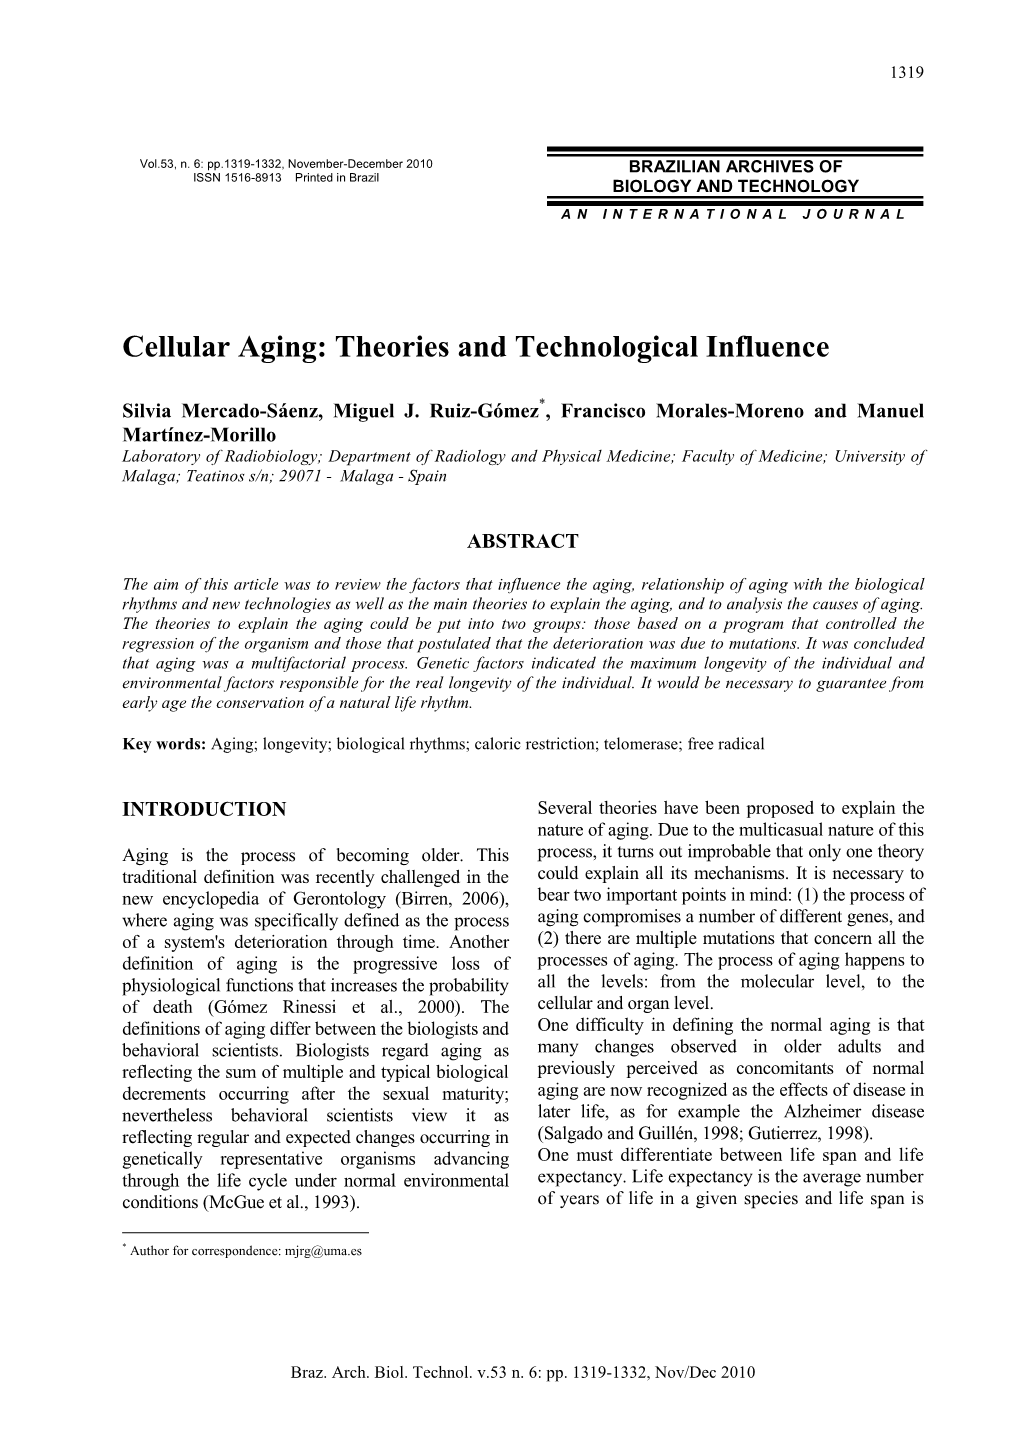 Cellular Aging: Theories and Technological Influence